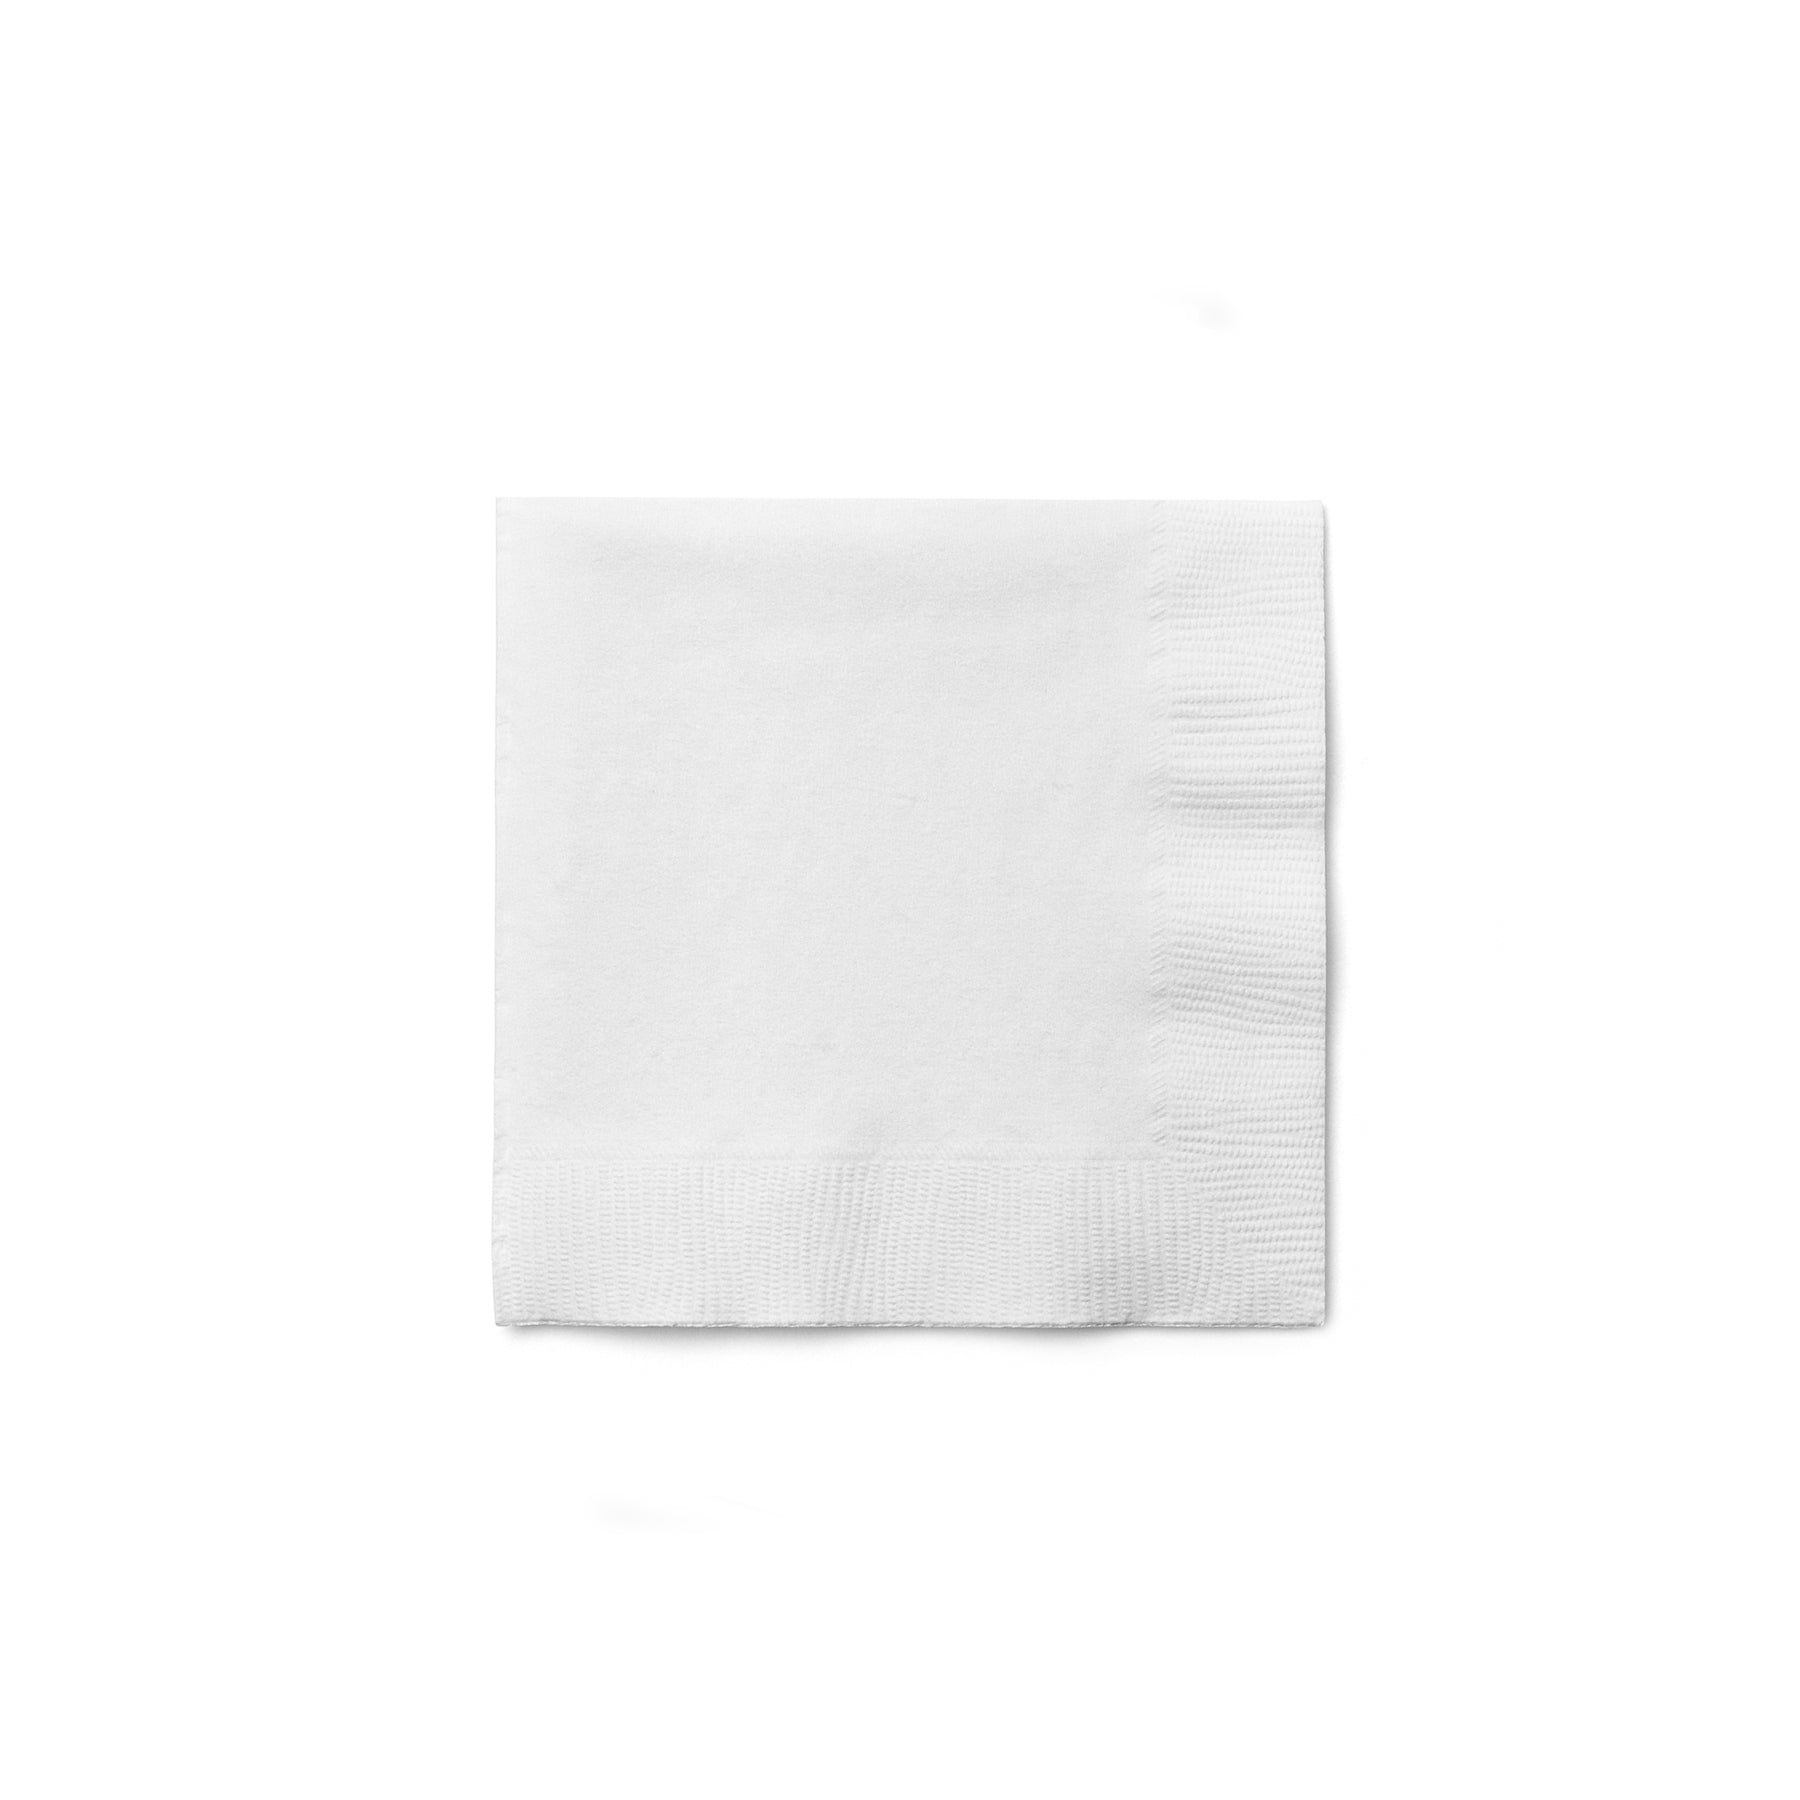 Cocktail Napkins - Package of 100